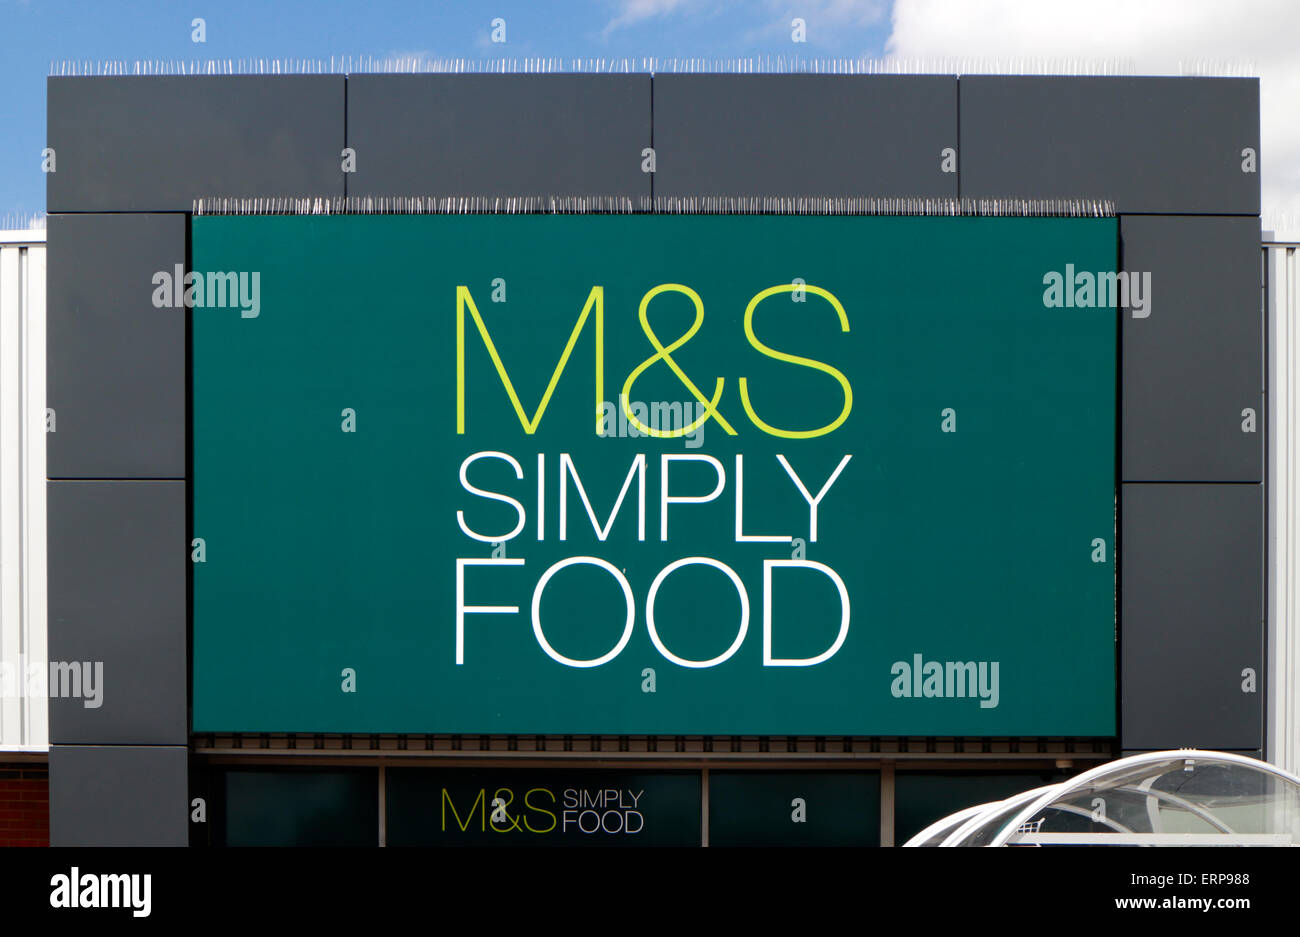 A view of M&S Simply Food logo at Sweet Briar Retail Park, Norwich, Norfolk, England, United Kingdom. Stock Photo